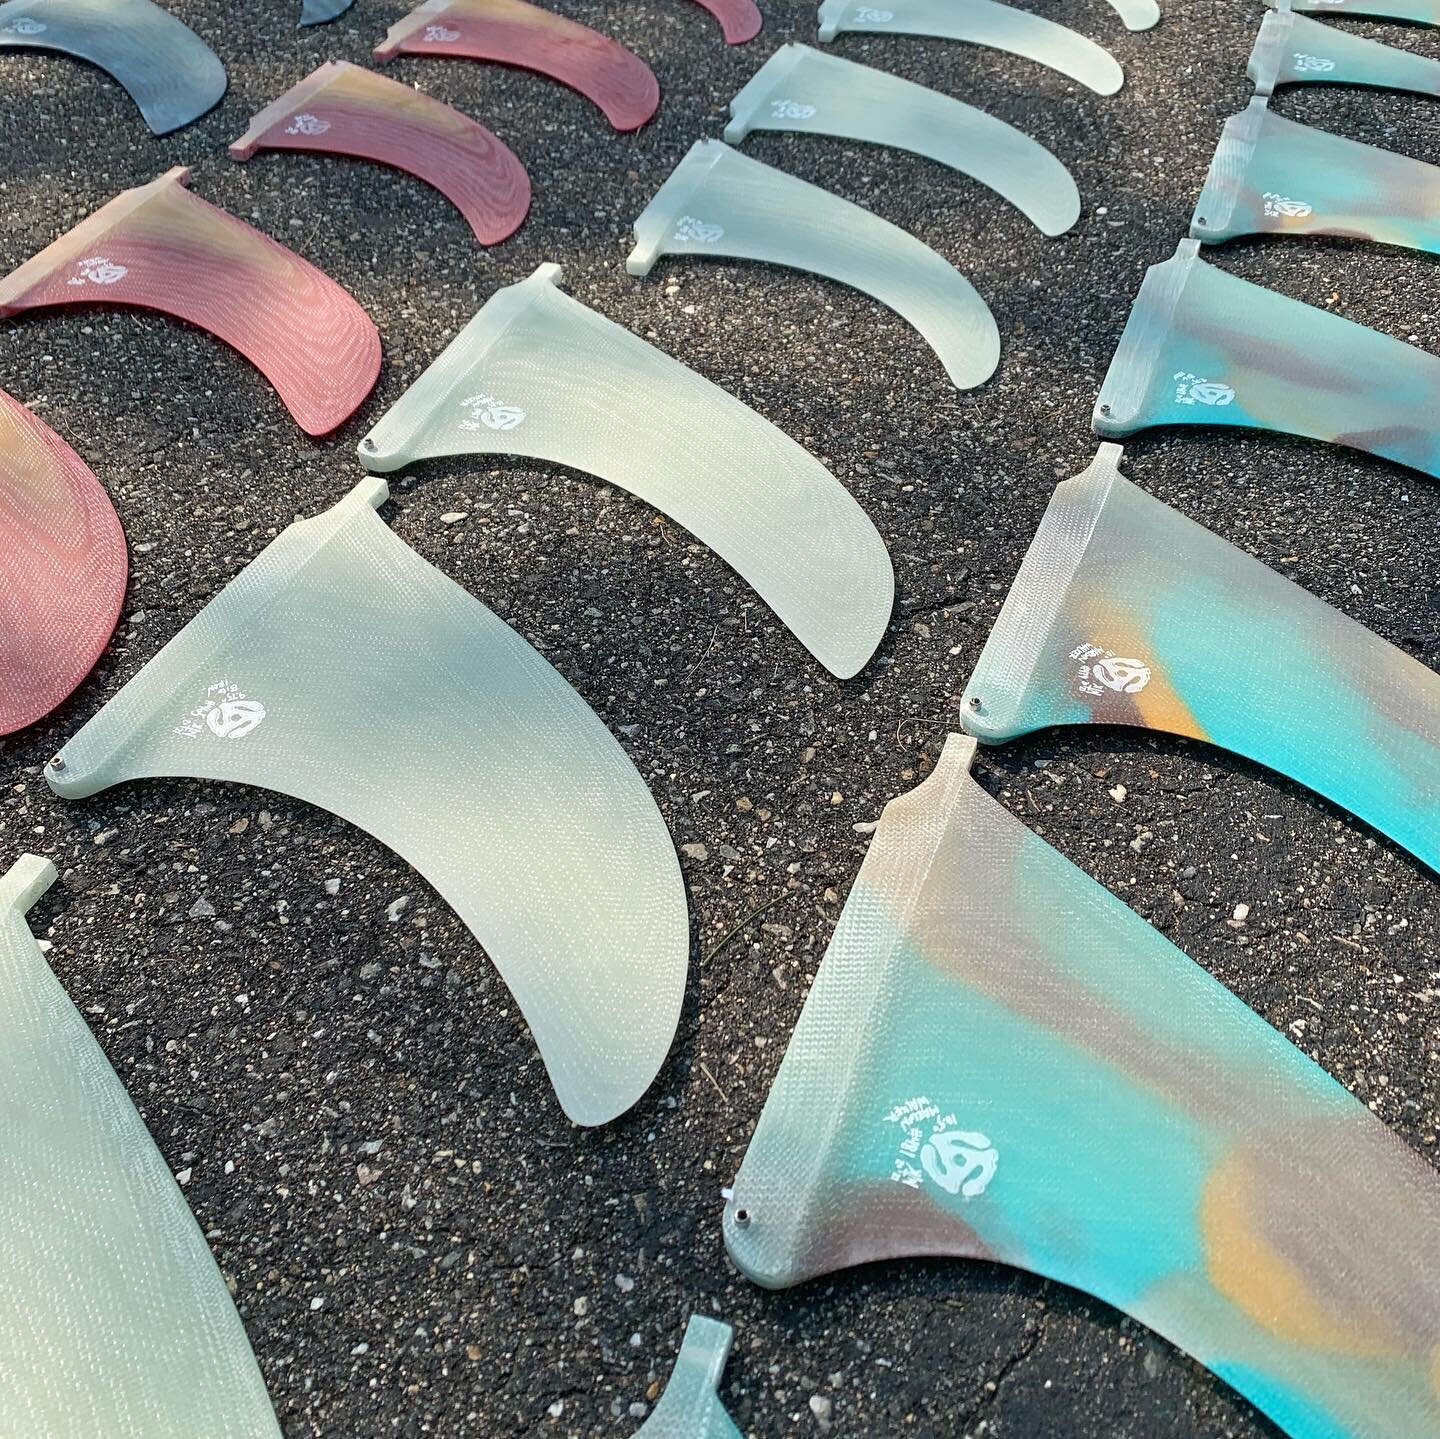 An absolute pile of fins are on their way to @adam.mar. Four different colorways and 5 different templates comprise this collection. Hand-dyed local indigo shibori inlays, clear volan, abstract and layered resin tint. Thank you, Adam, for your trust 